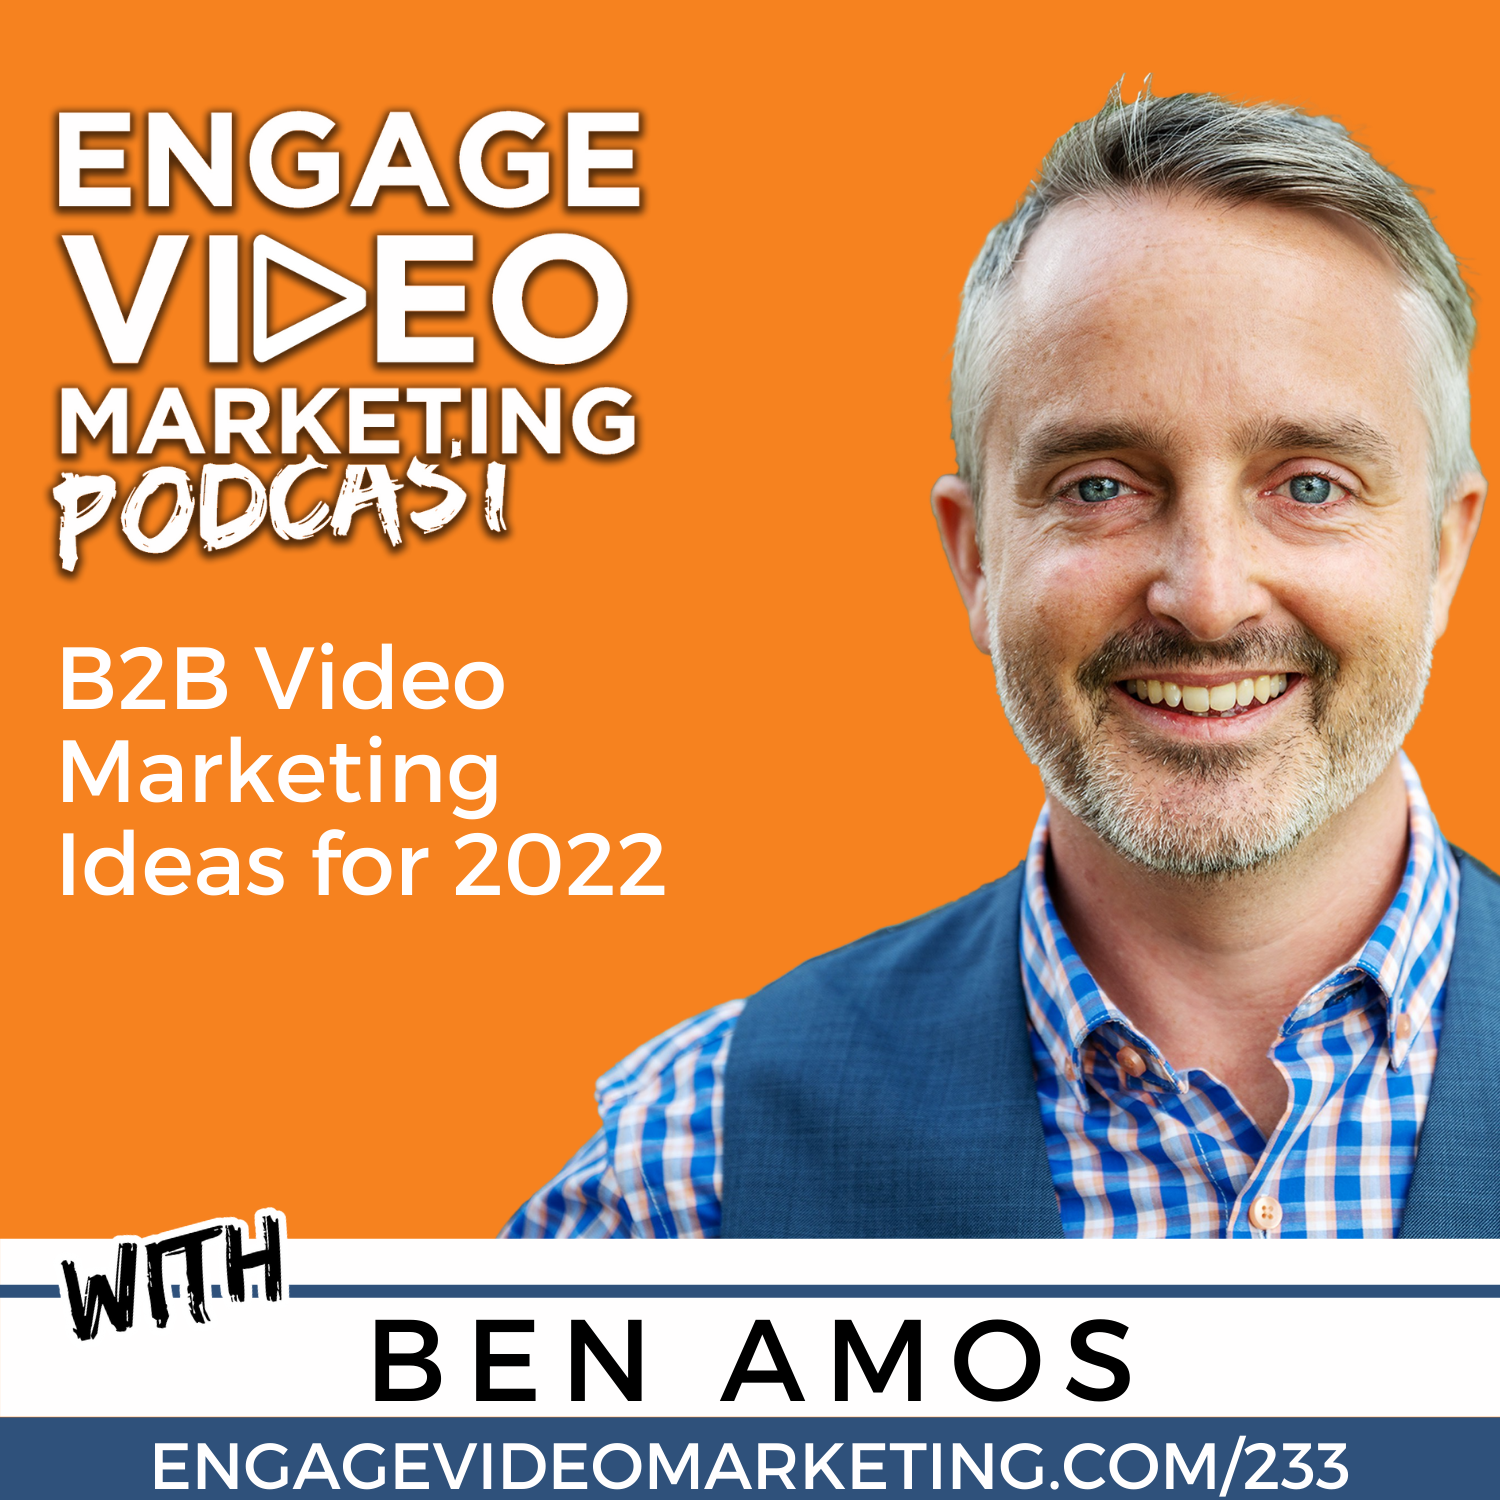 B2B Video Marketing Ideas for 2022 with Ben Amos